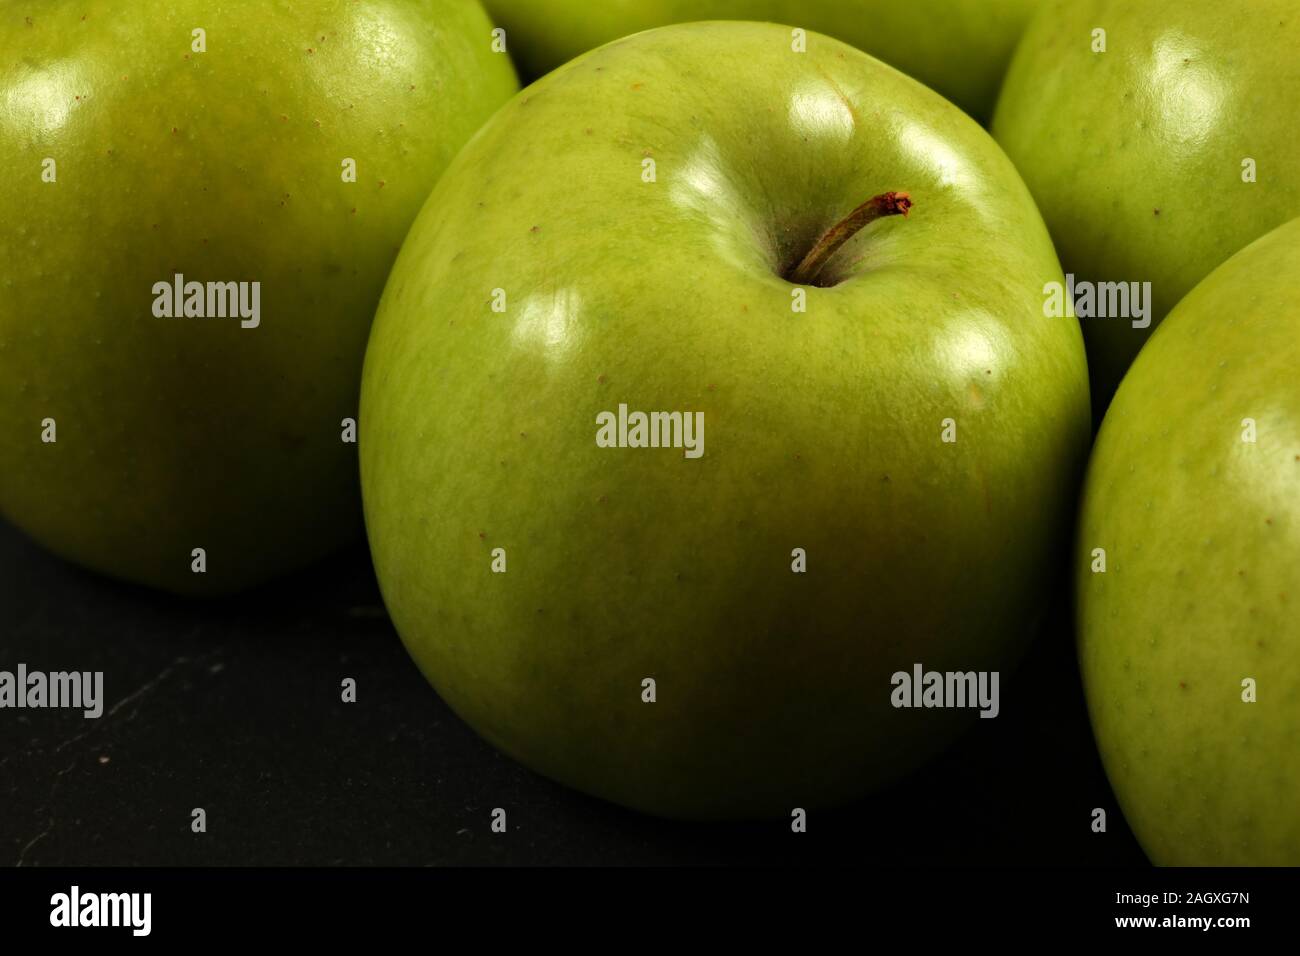 Closeup of green apples on black board, detailed photo - texture on apple skin visible. Stock Photo